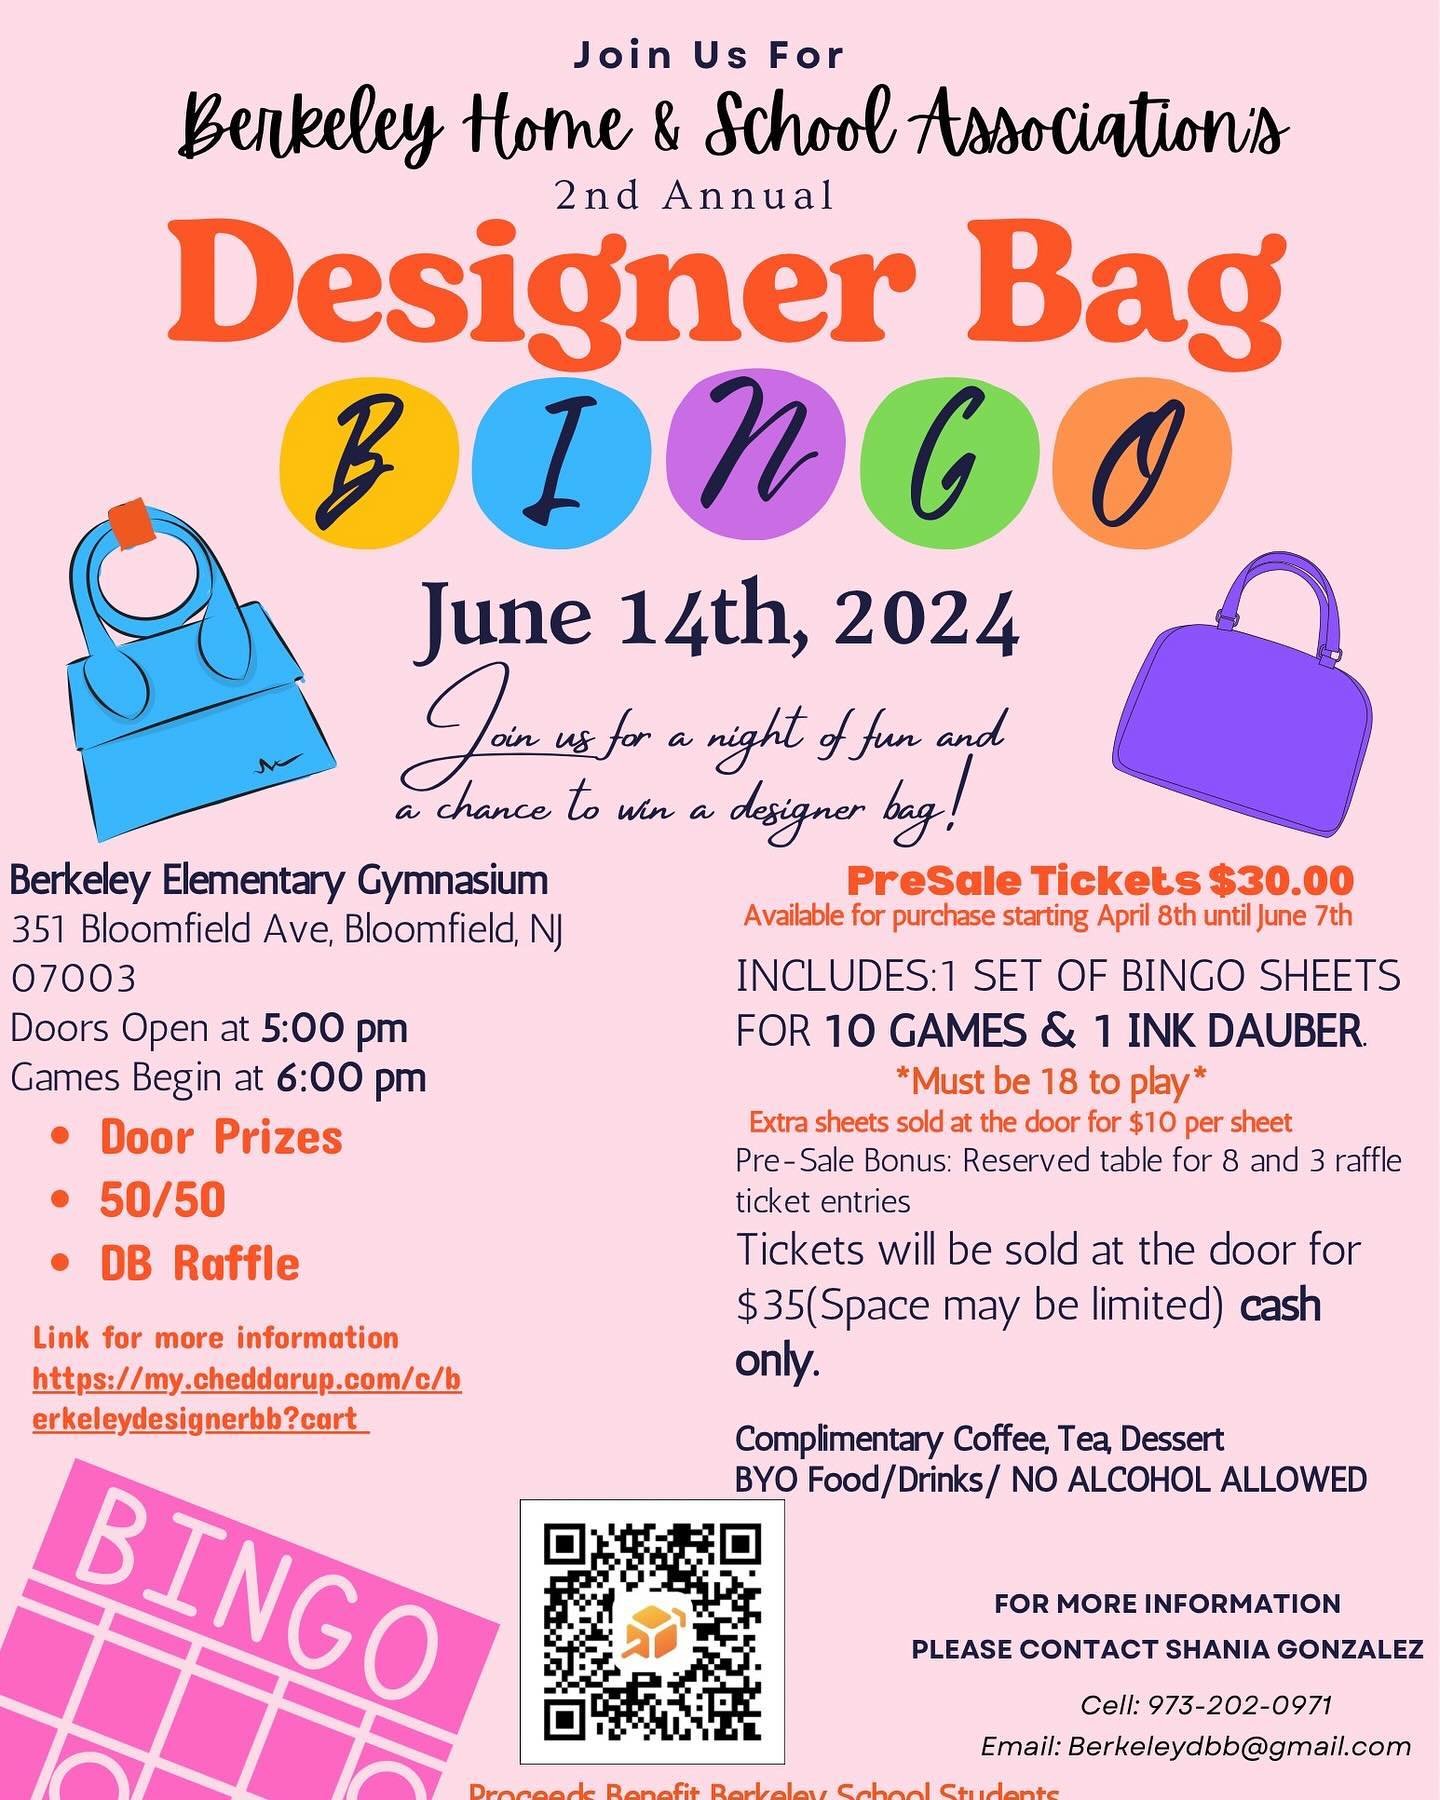 Join Us For Berkeley Home &amp; School Association&rsquo;s

2nd Annual

DESIGNER BAG BINGO

Join us for a night of fun and a chance to win a designer bag!

👜 🀞🀞 🎰🔢🎉 🎱 &middot; 🎰 &middot; 🅱 &middot; 🎲 &middot; 🍀 &middot; 🅱️ &middot; 🌟 &mi